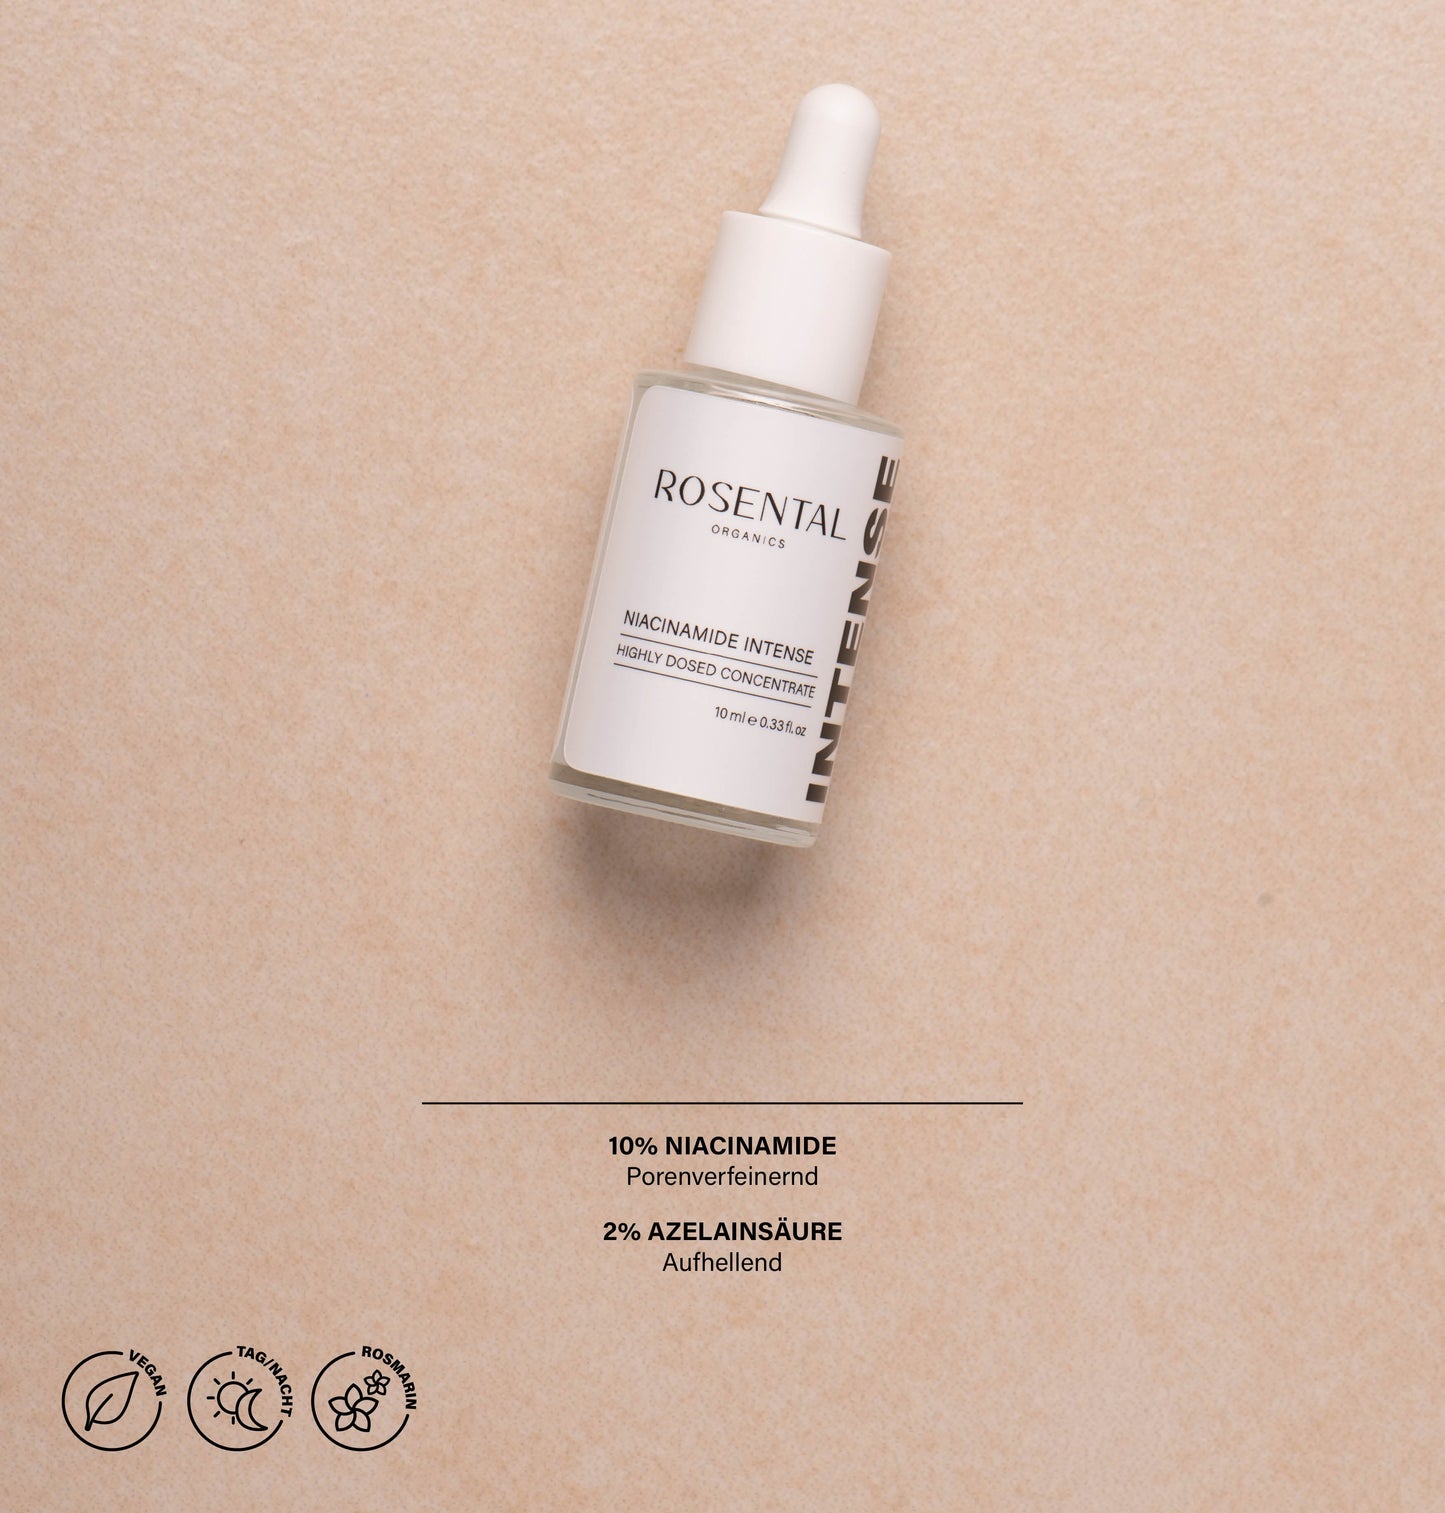 Niacinamide Intense Serum | Highly Dosed Concentrate